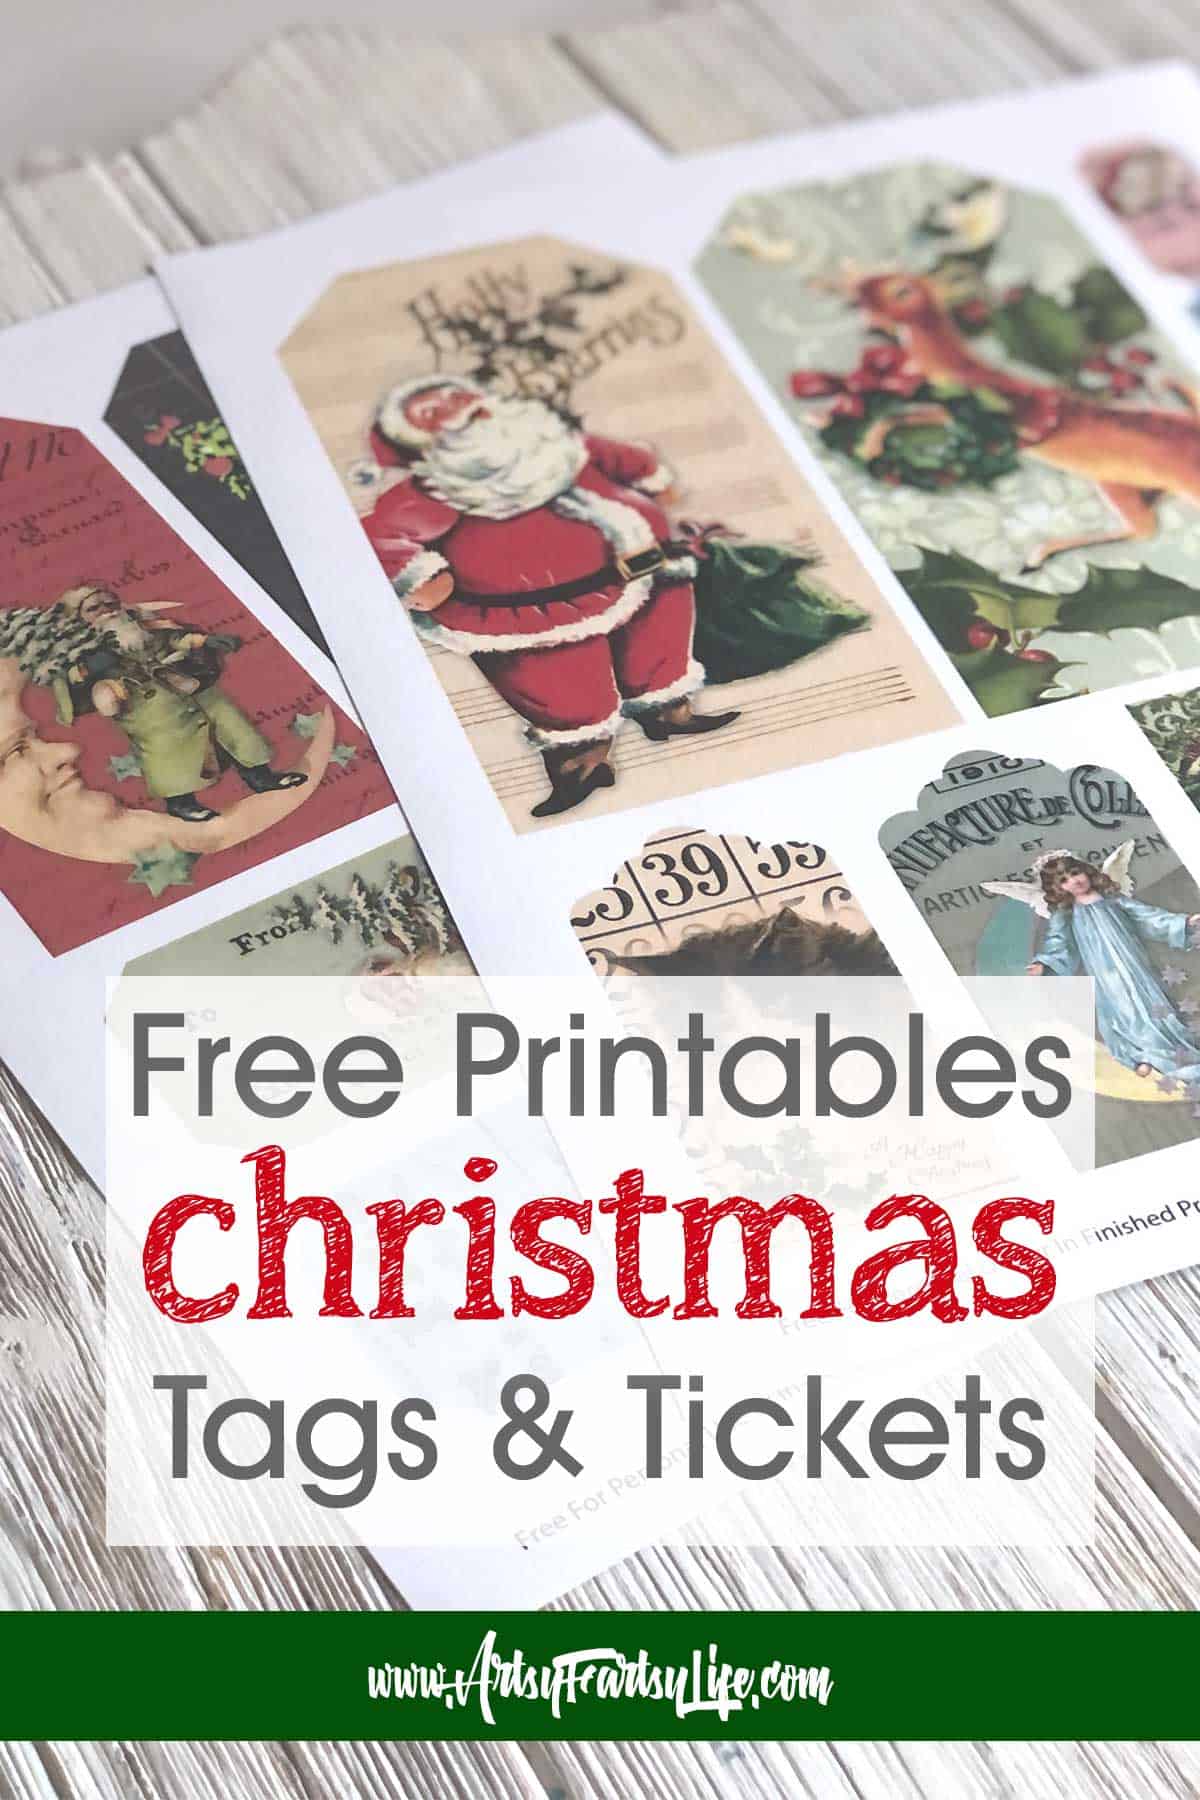 Free Printable Christmas Gift Tags - My 3 Little Kittens